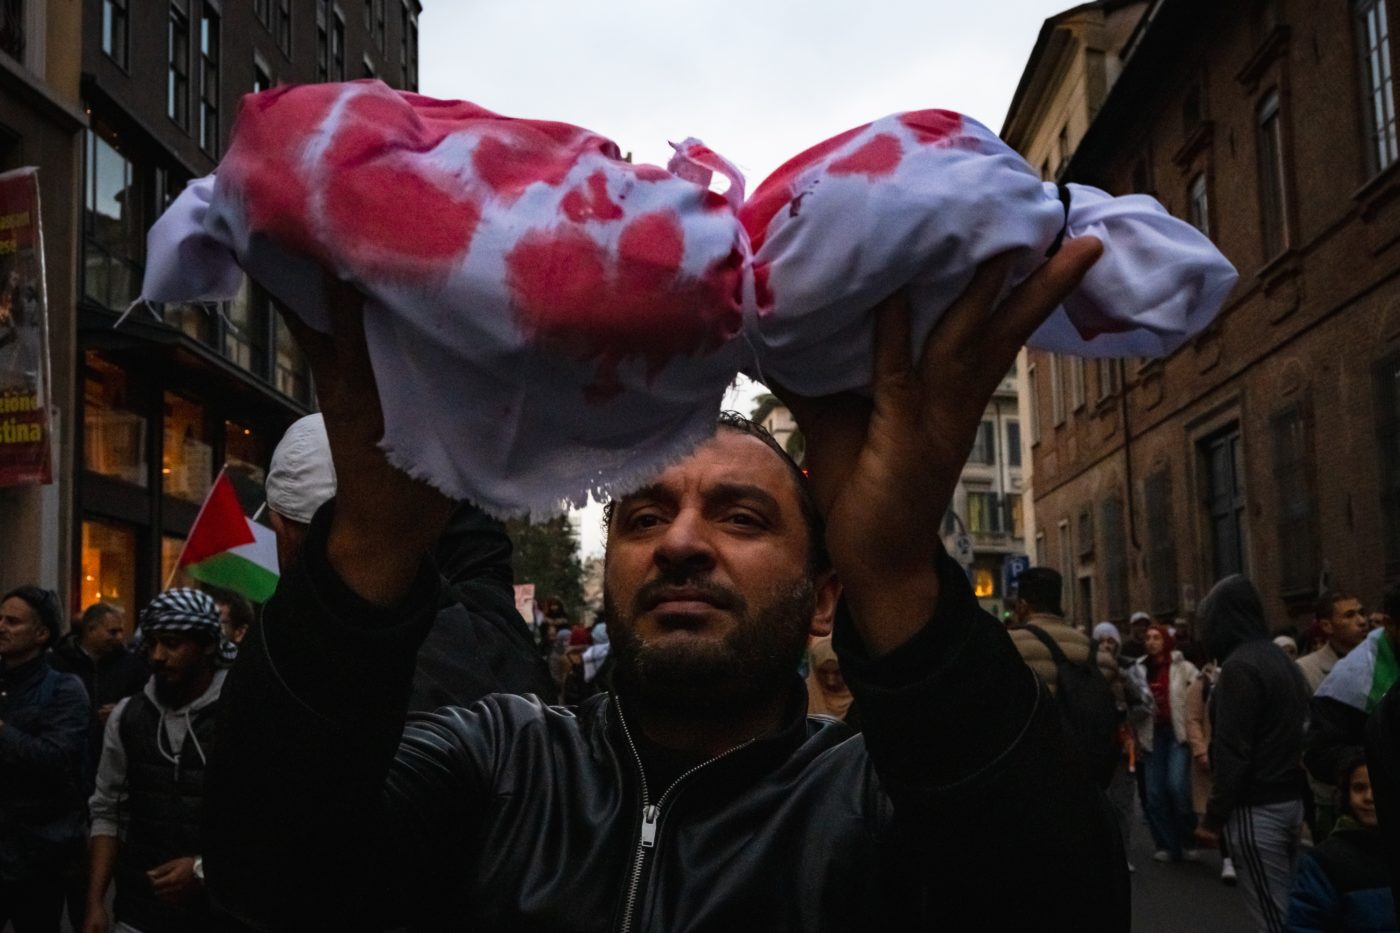 A man surrounded by a group holding Palestinian flags holds up a bloodied sheet.